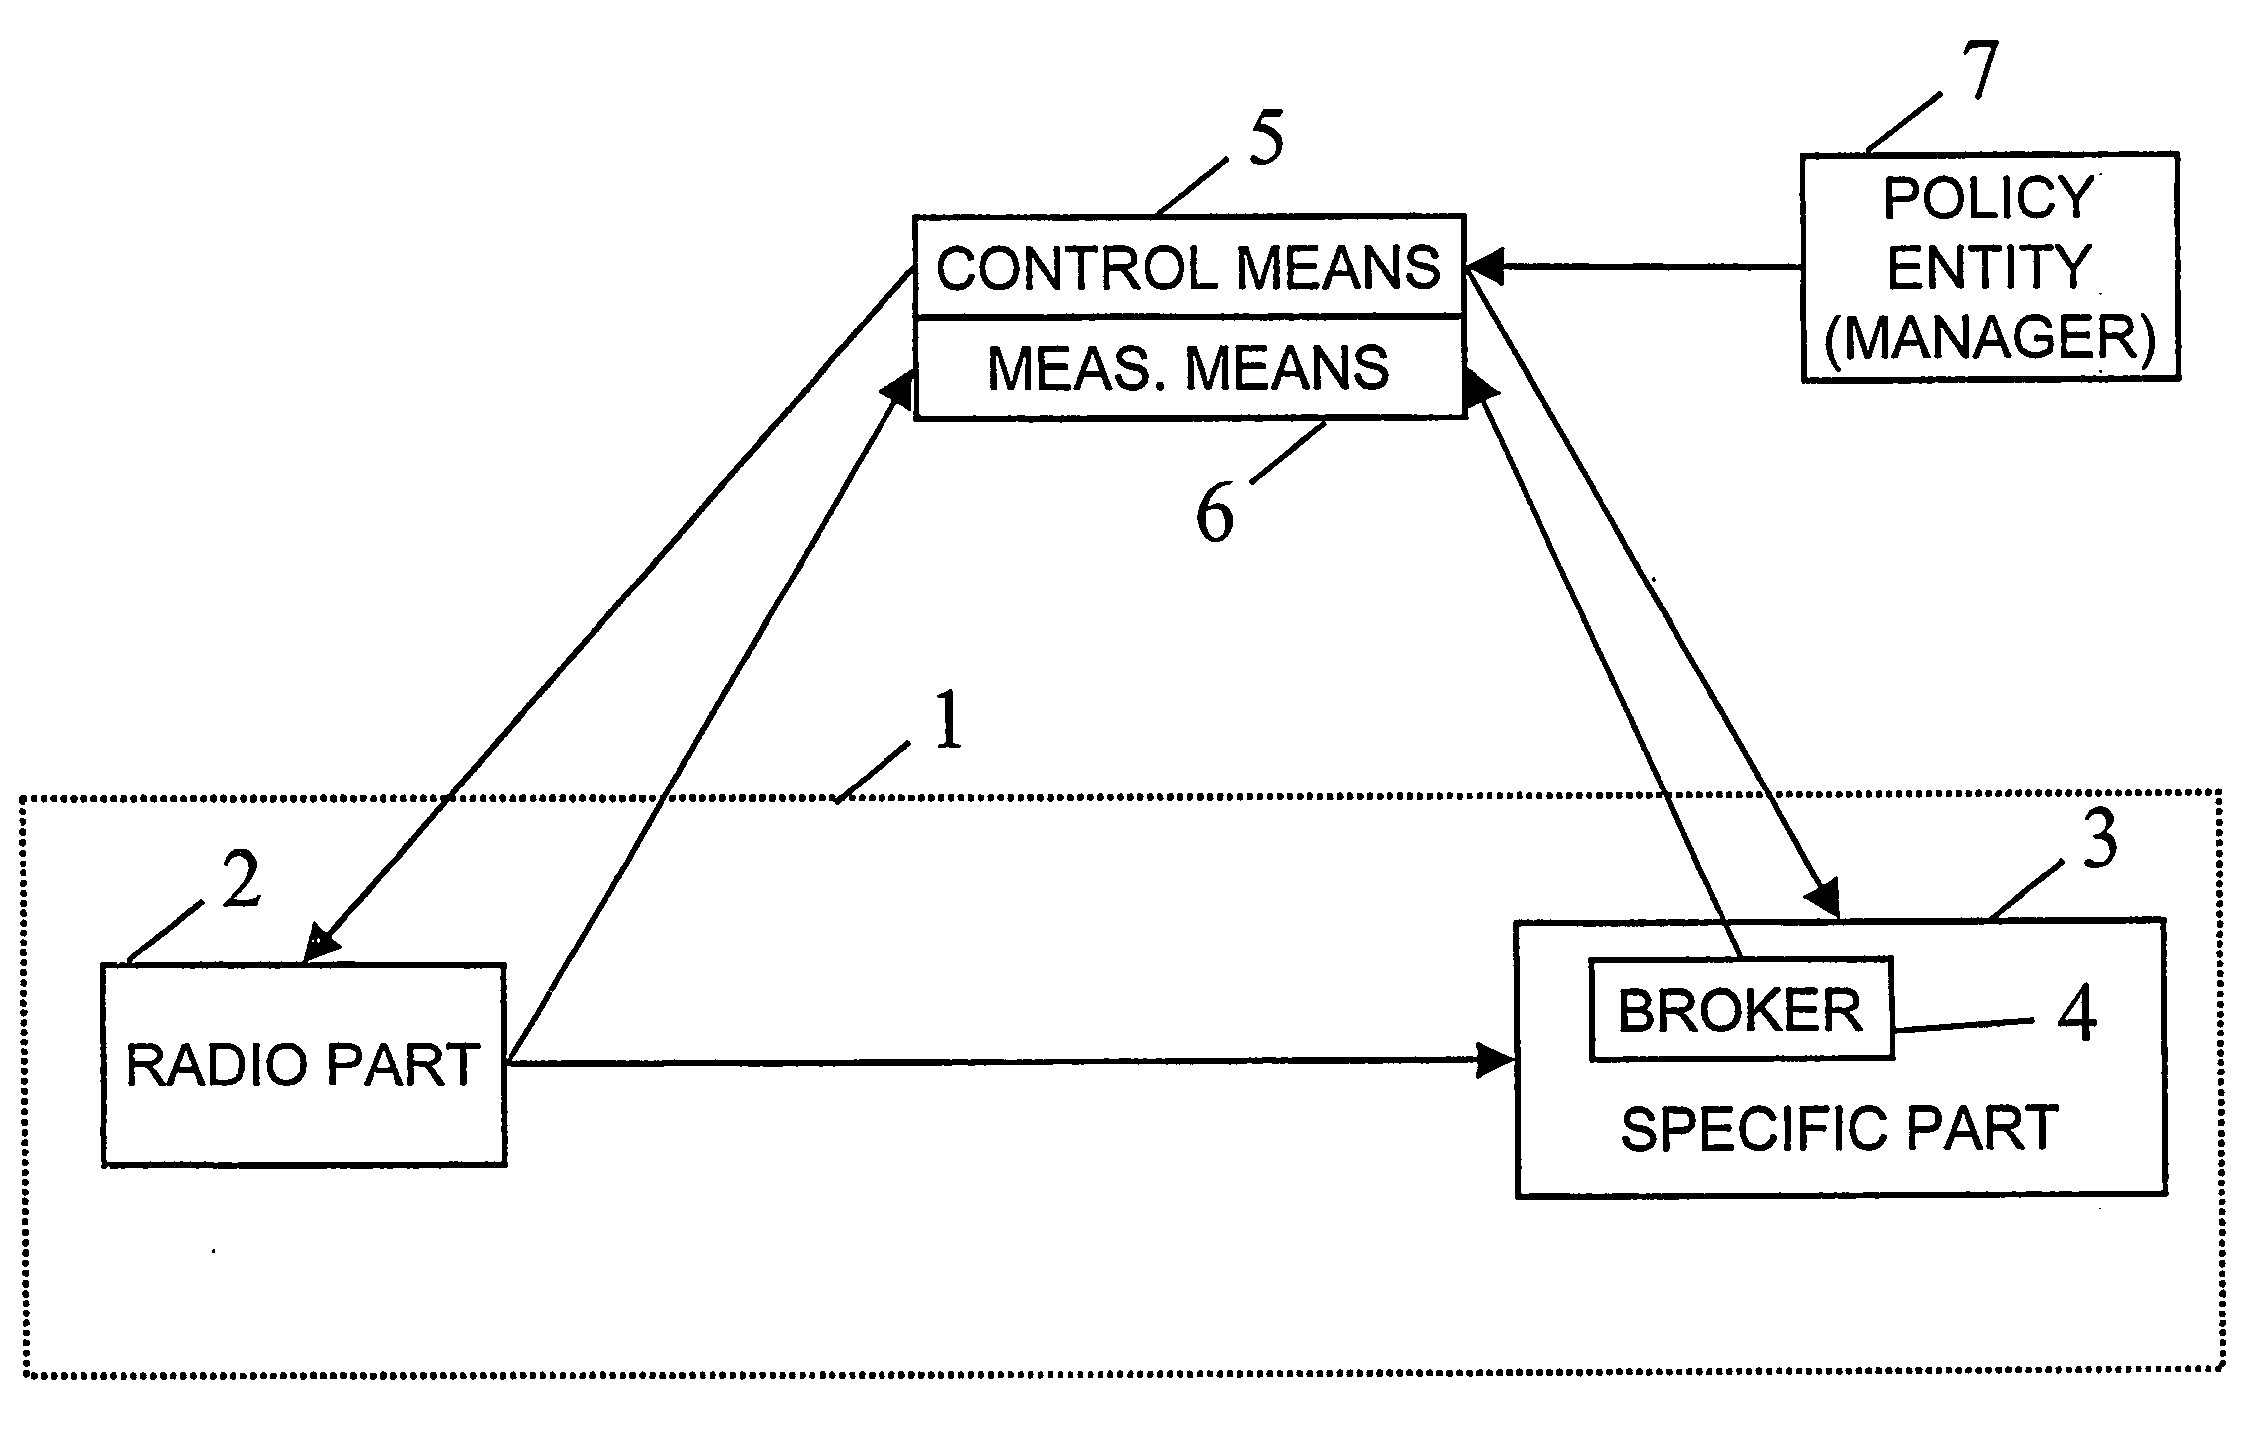 Traffic control in an ip based network